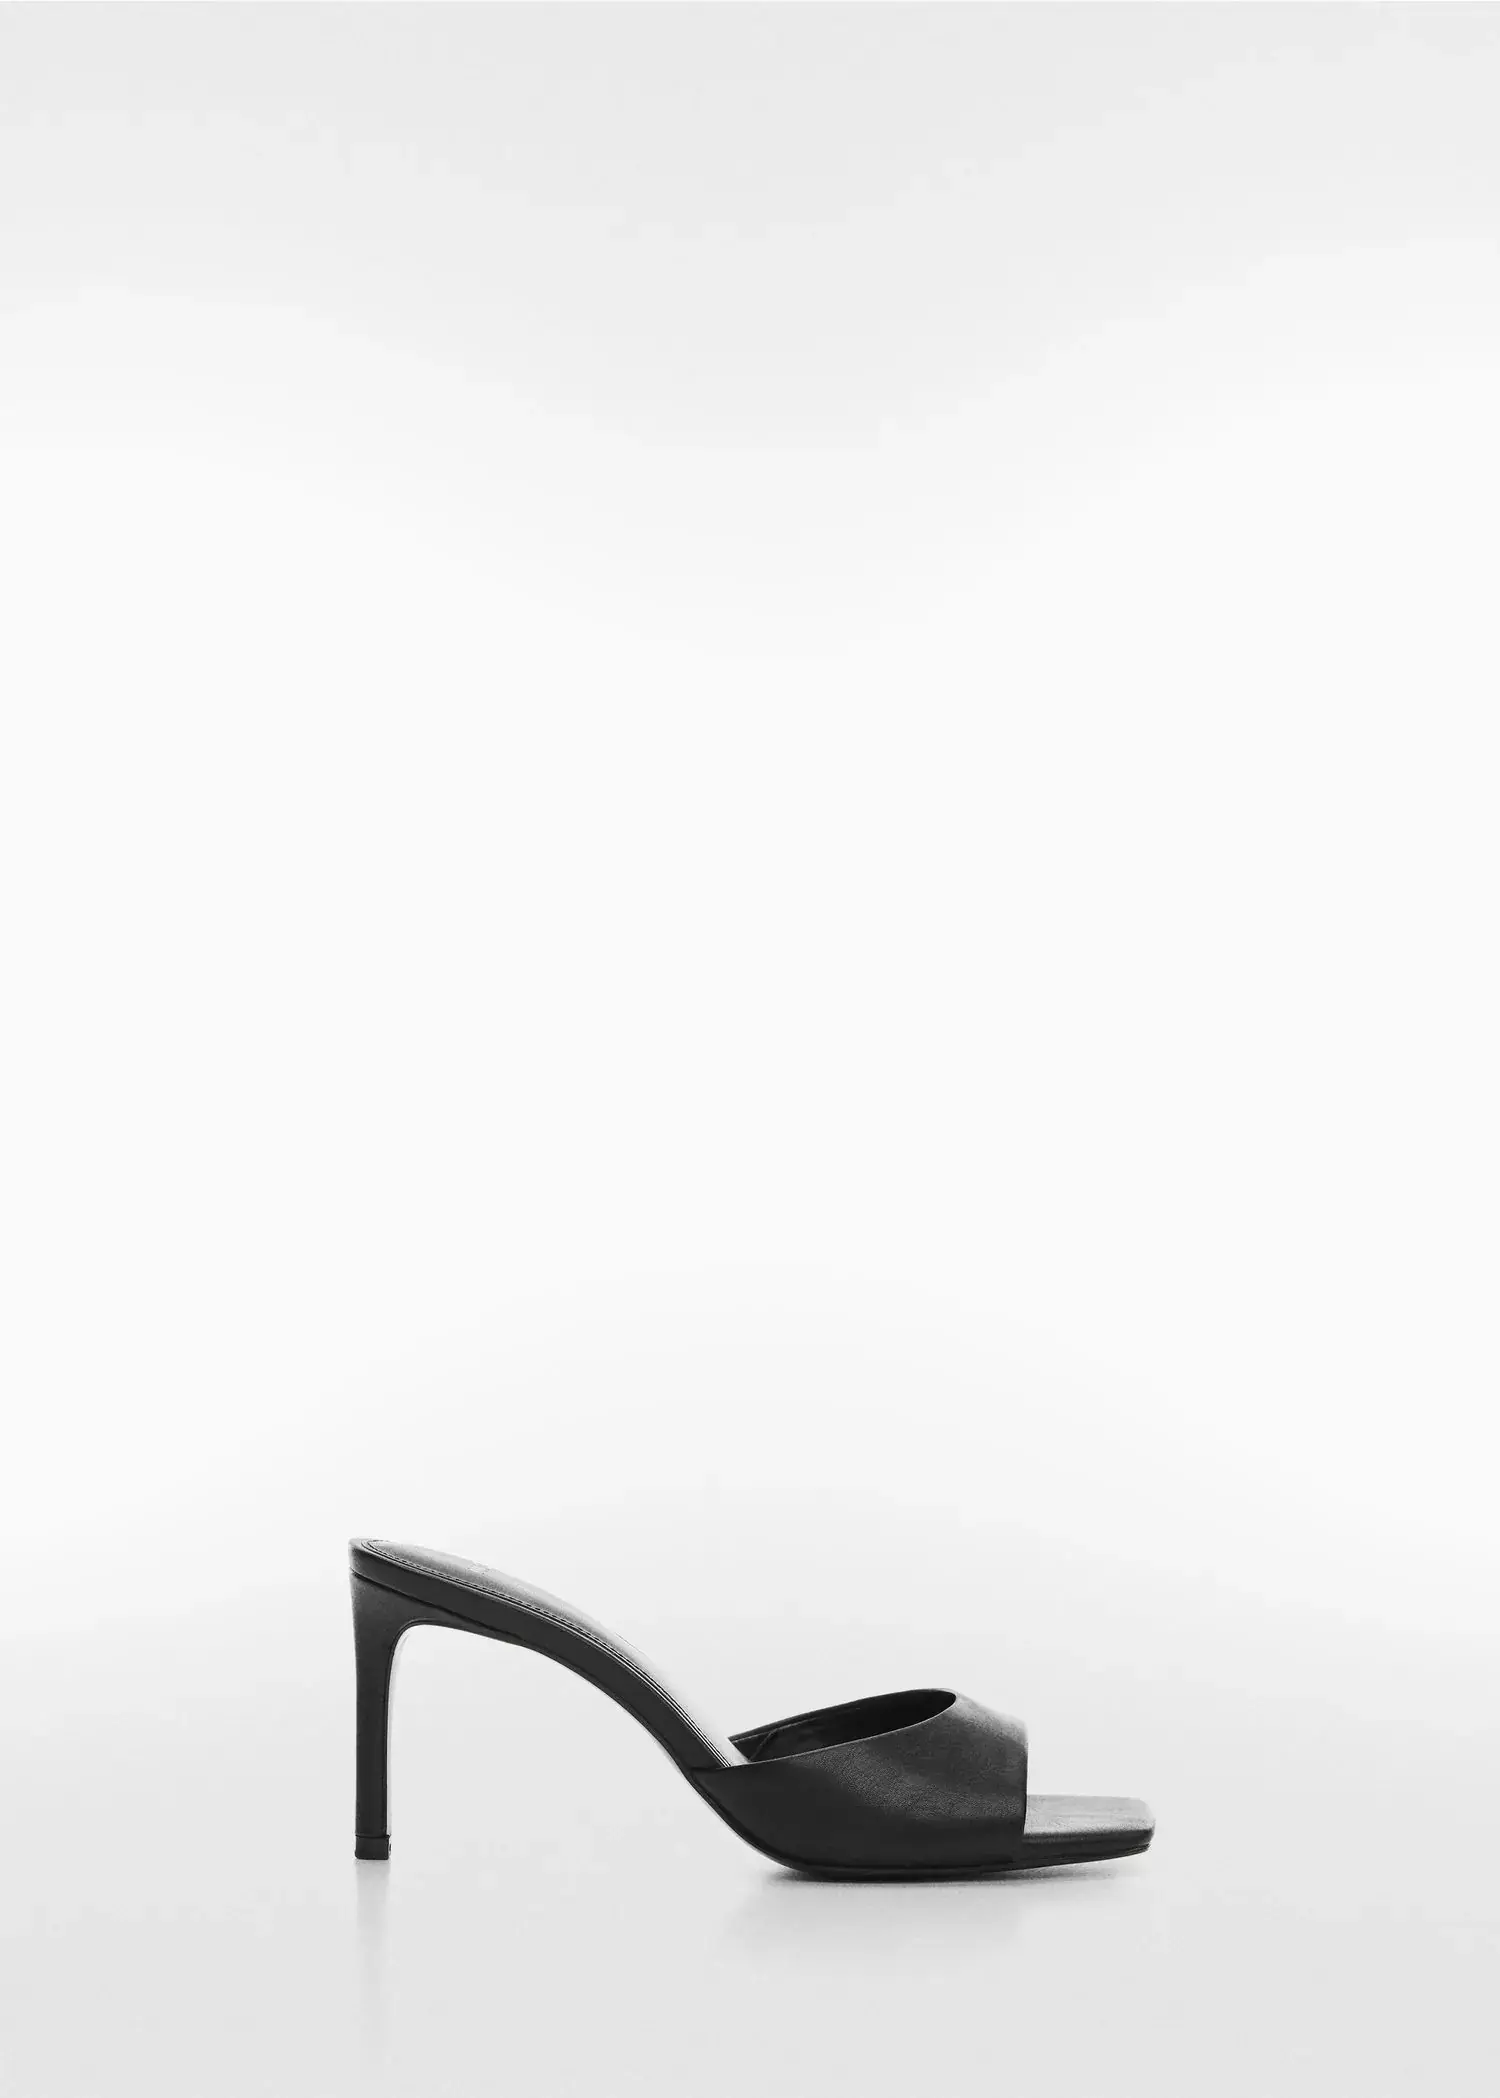 Mango Strappy heeled sandals. a pair of black high heeled shoes on a white background. 